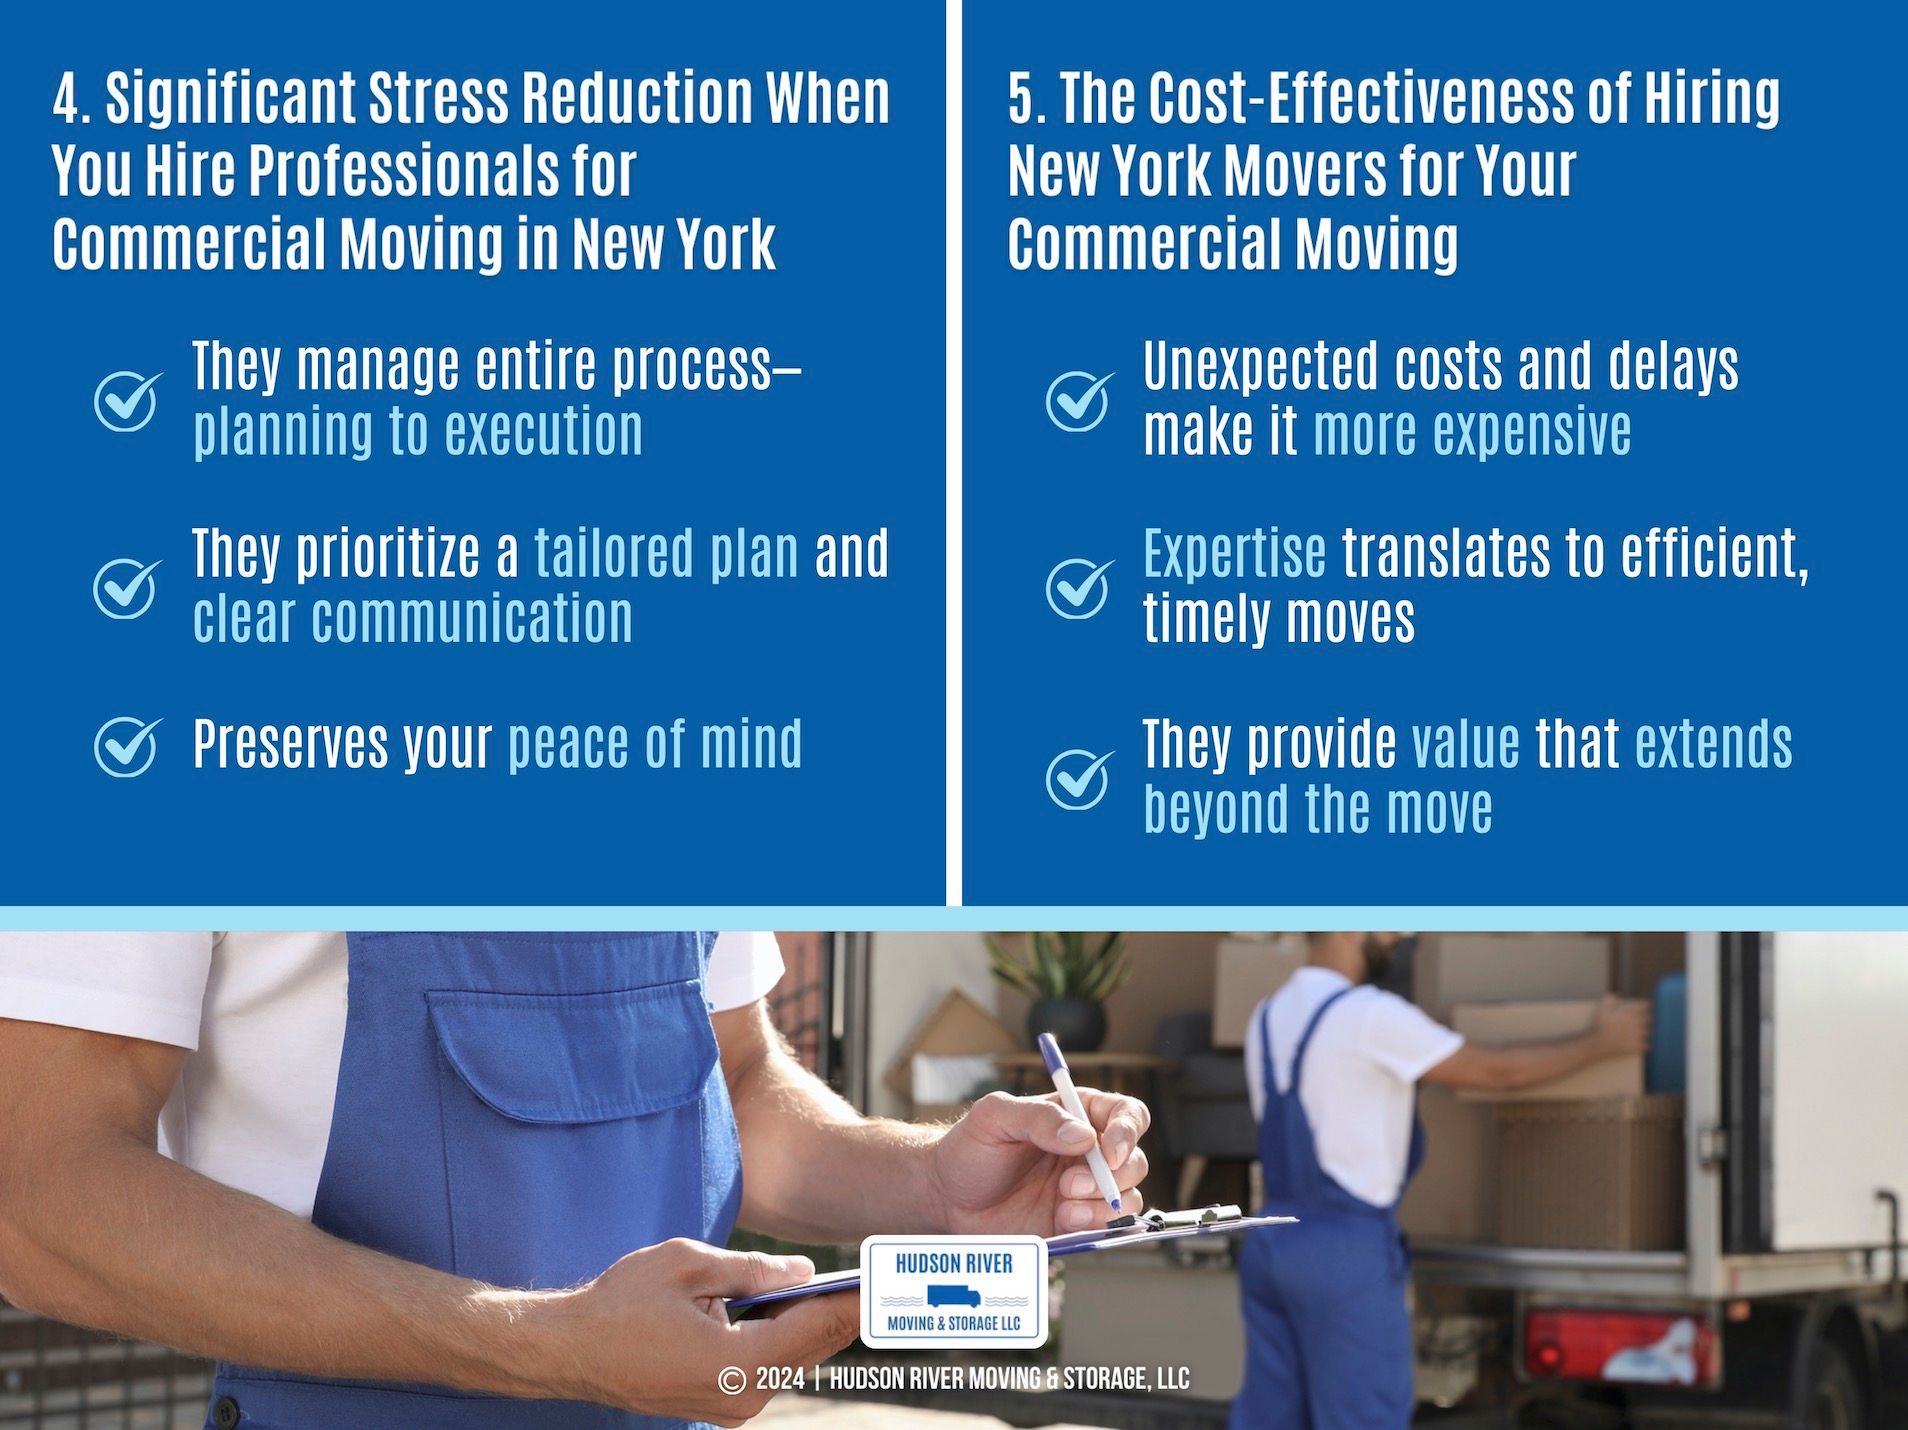 infographic highlights why commercial movers are cost-effective for your business, and how movers reduce stress on your team